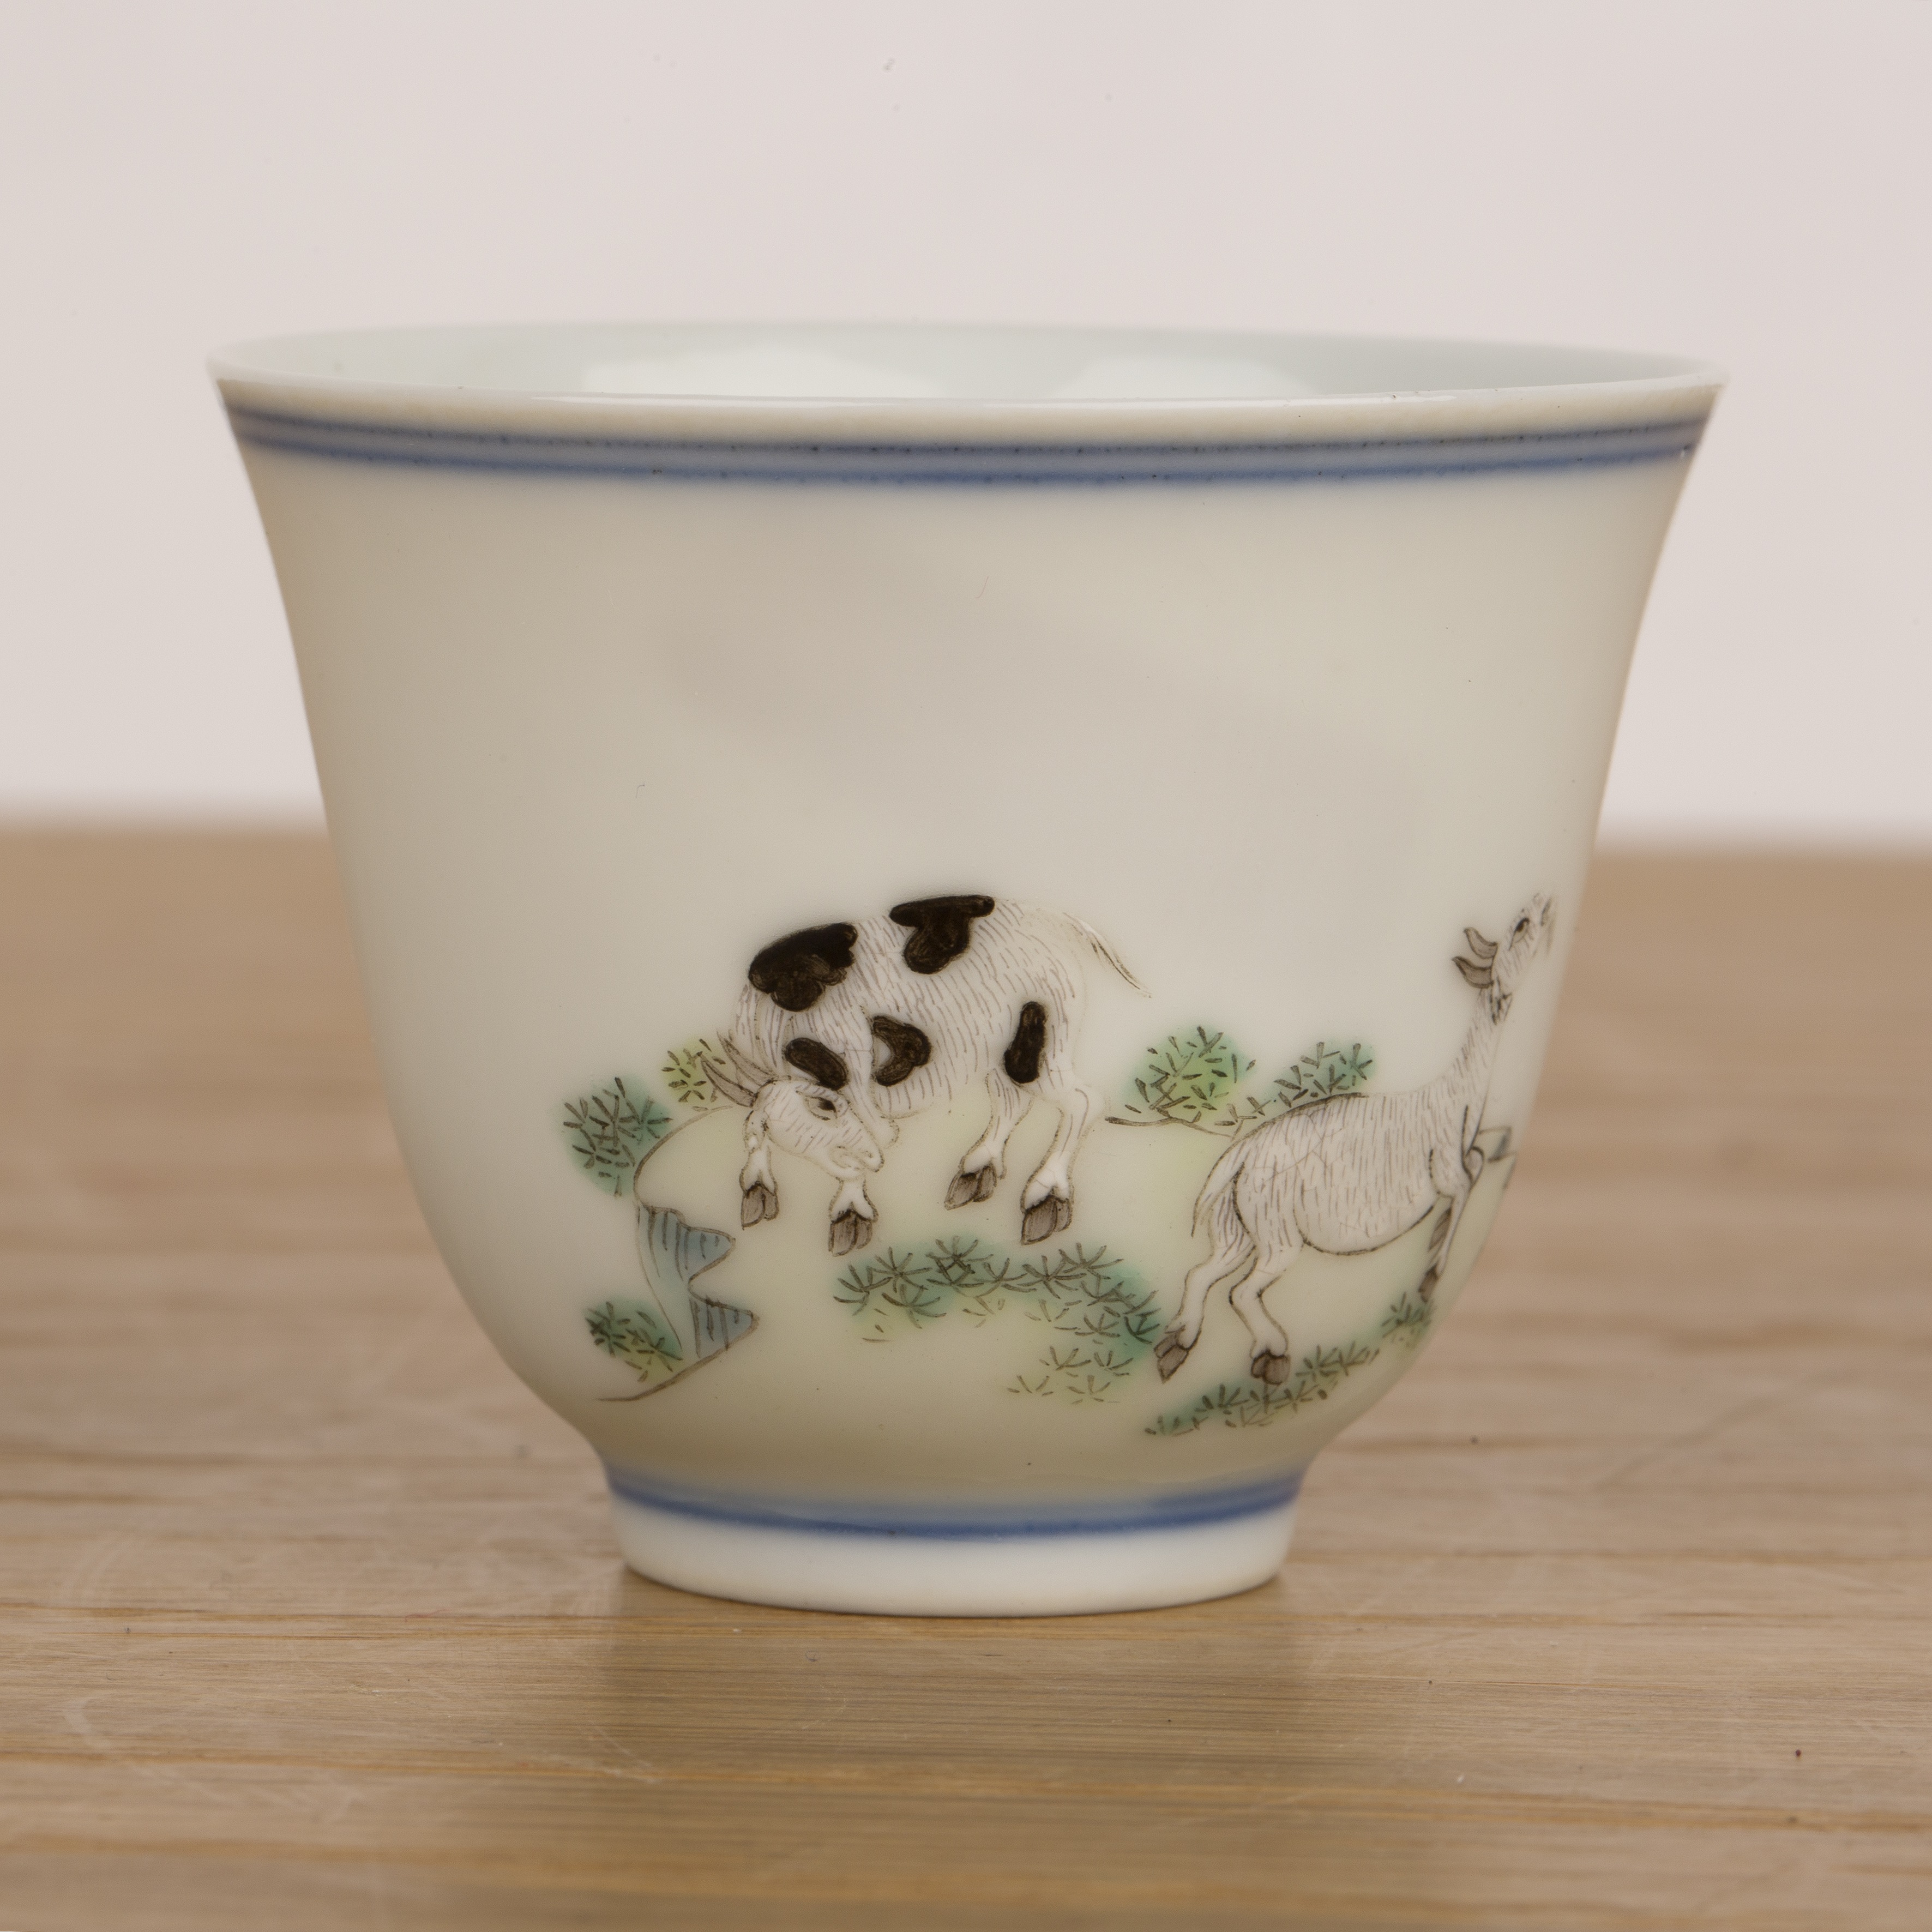 Doucai porcelain small tea bowl Chinese painted in enamels with a water buffalo being ridden by a - Image 2 of 15